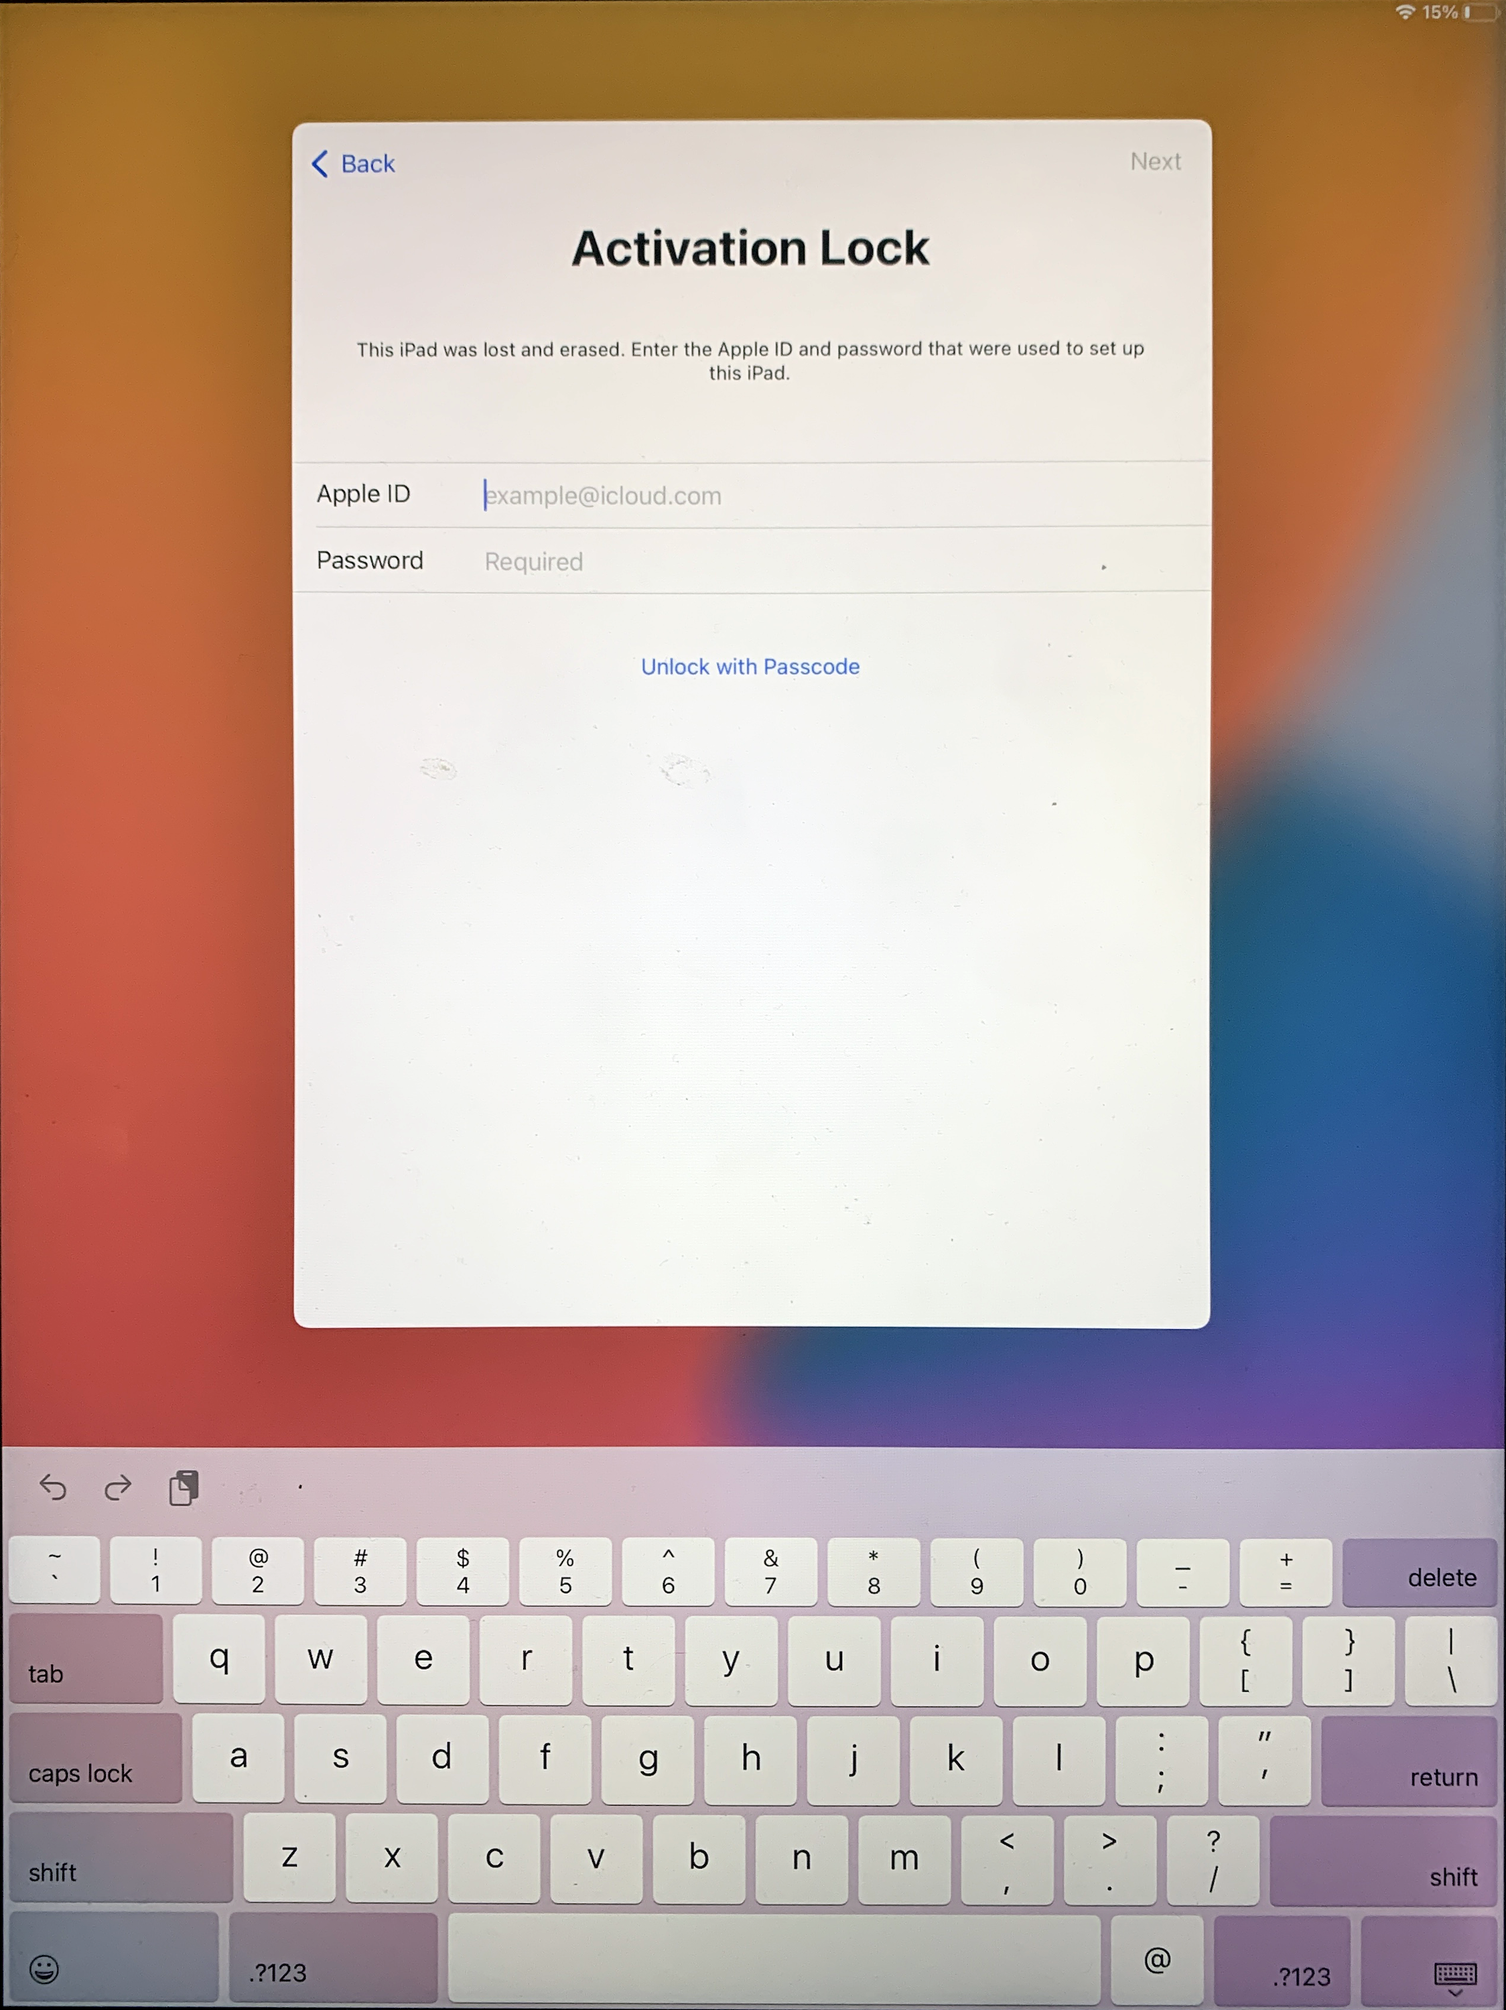 The Activation Lock screen on an iPad.